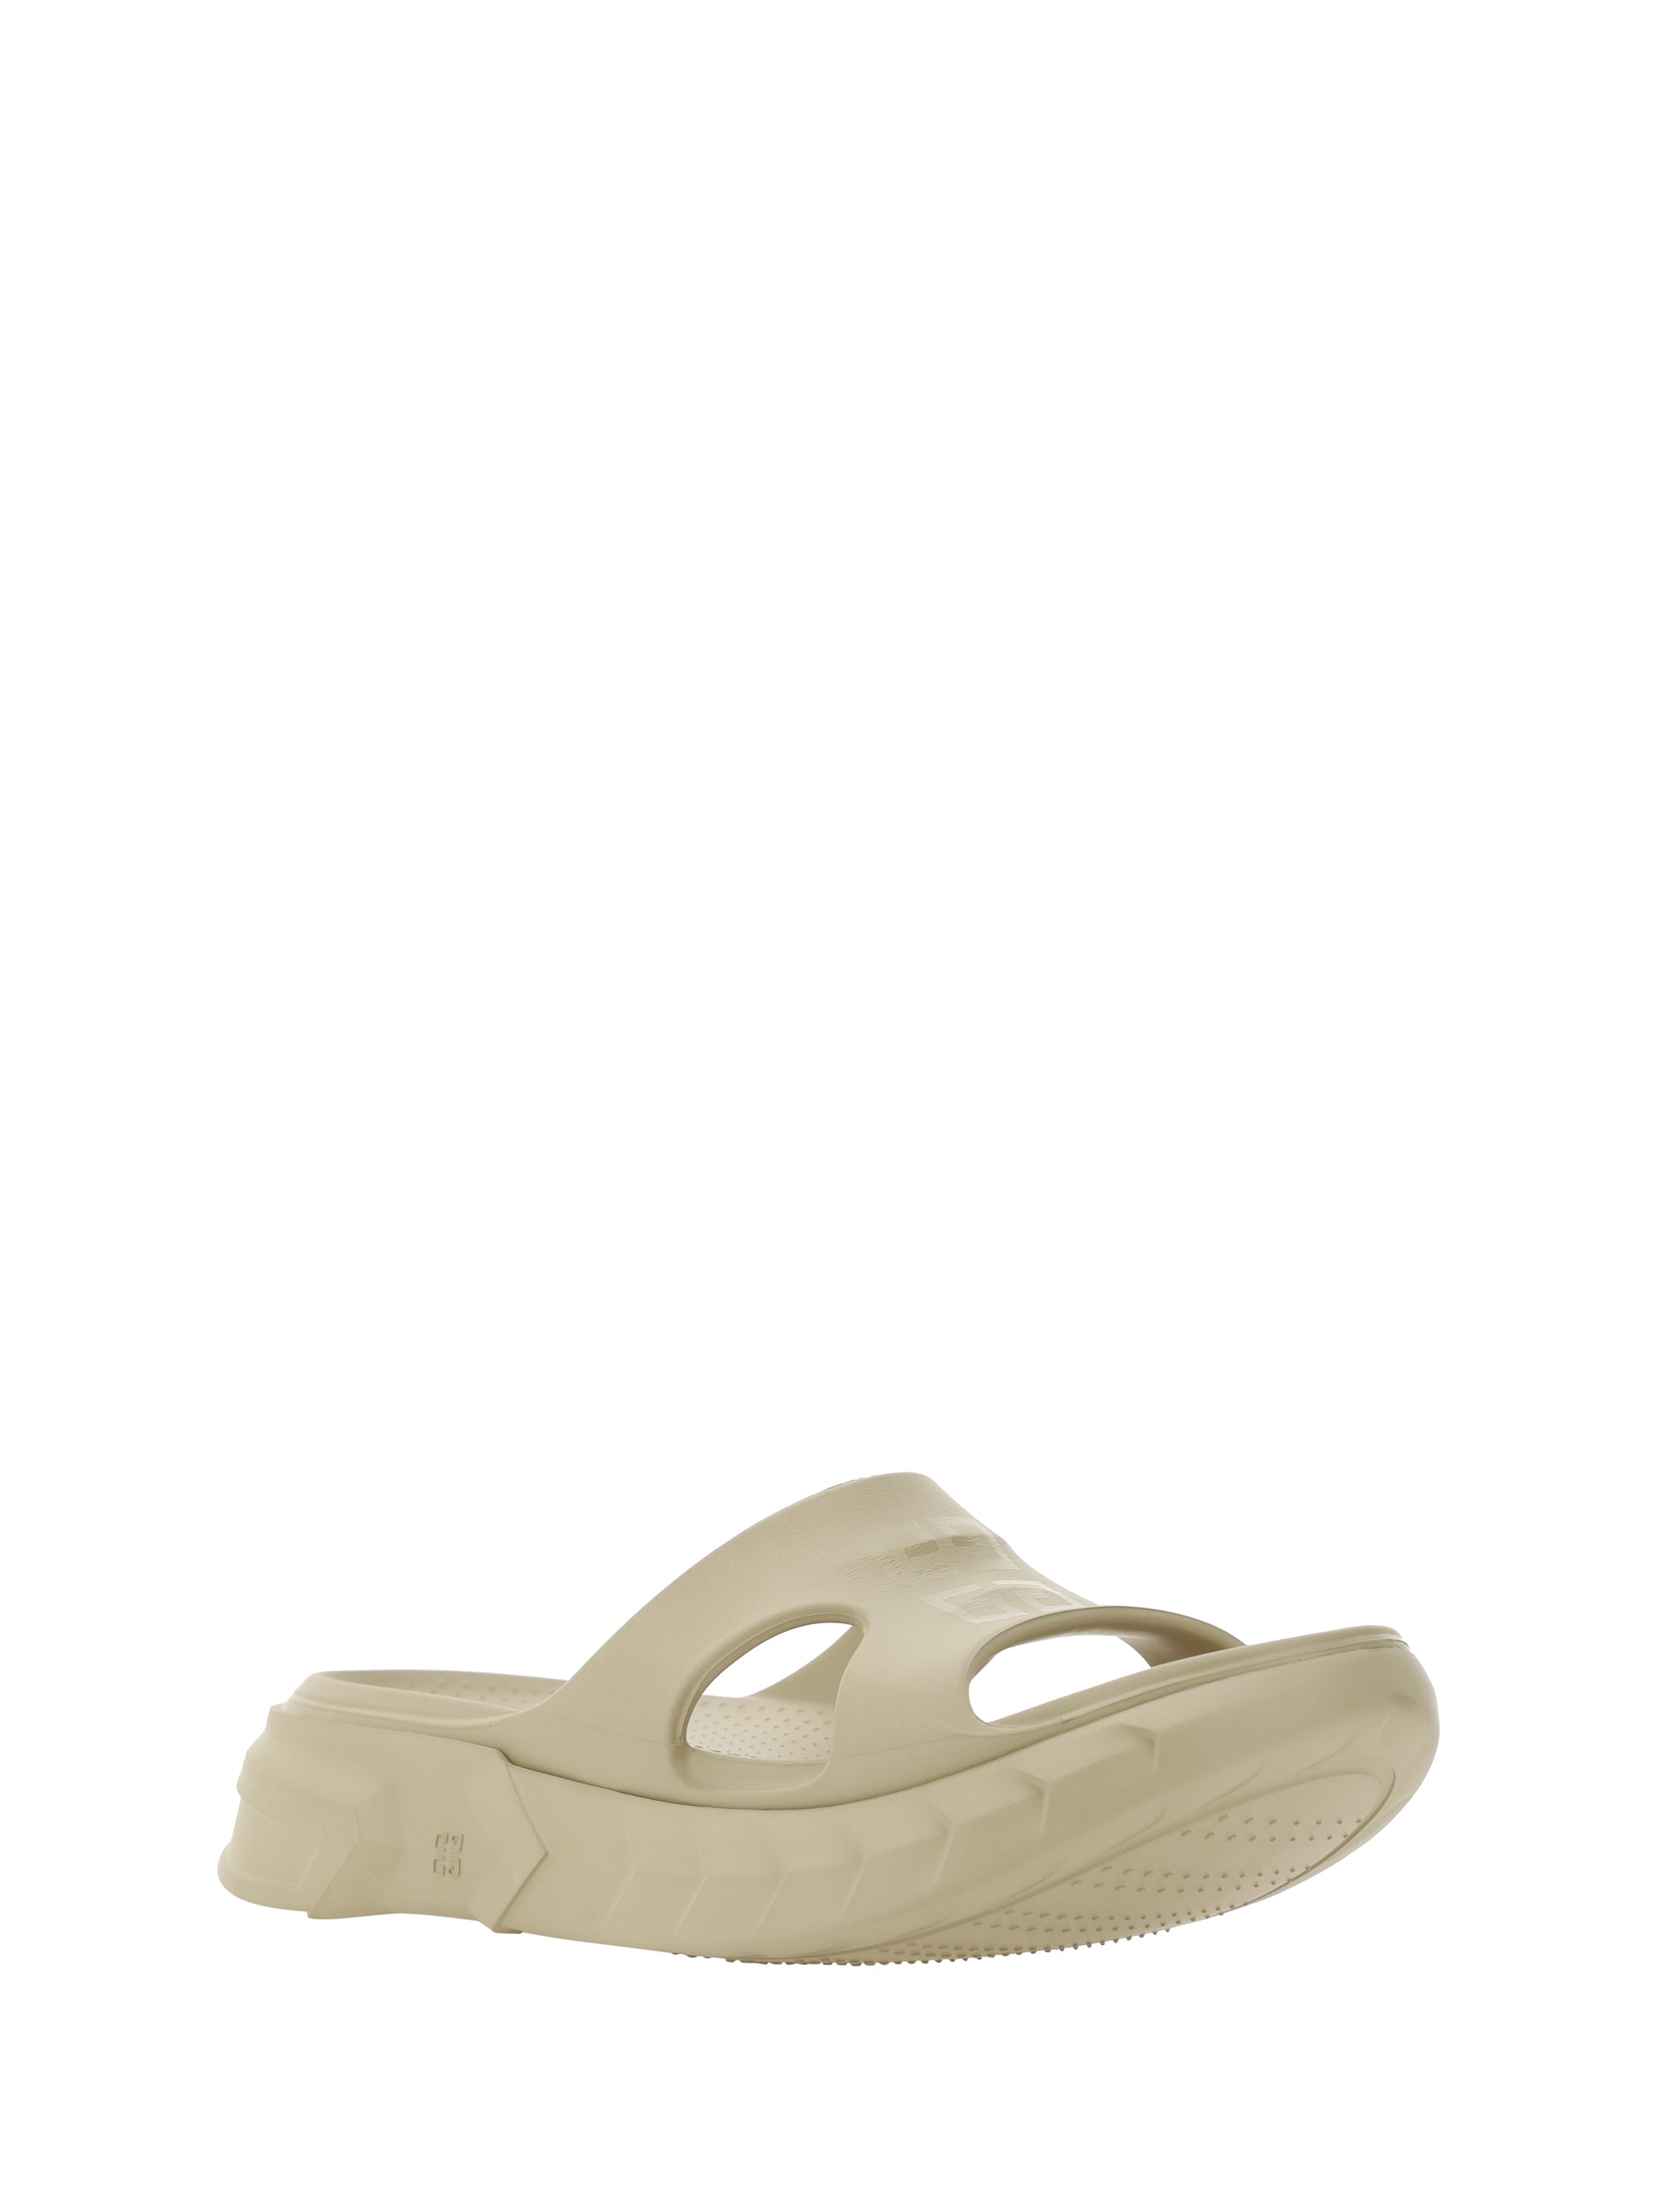 Shop Givenchy Marshmallow Sandals